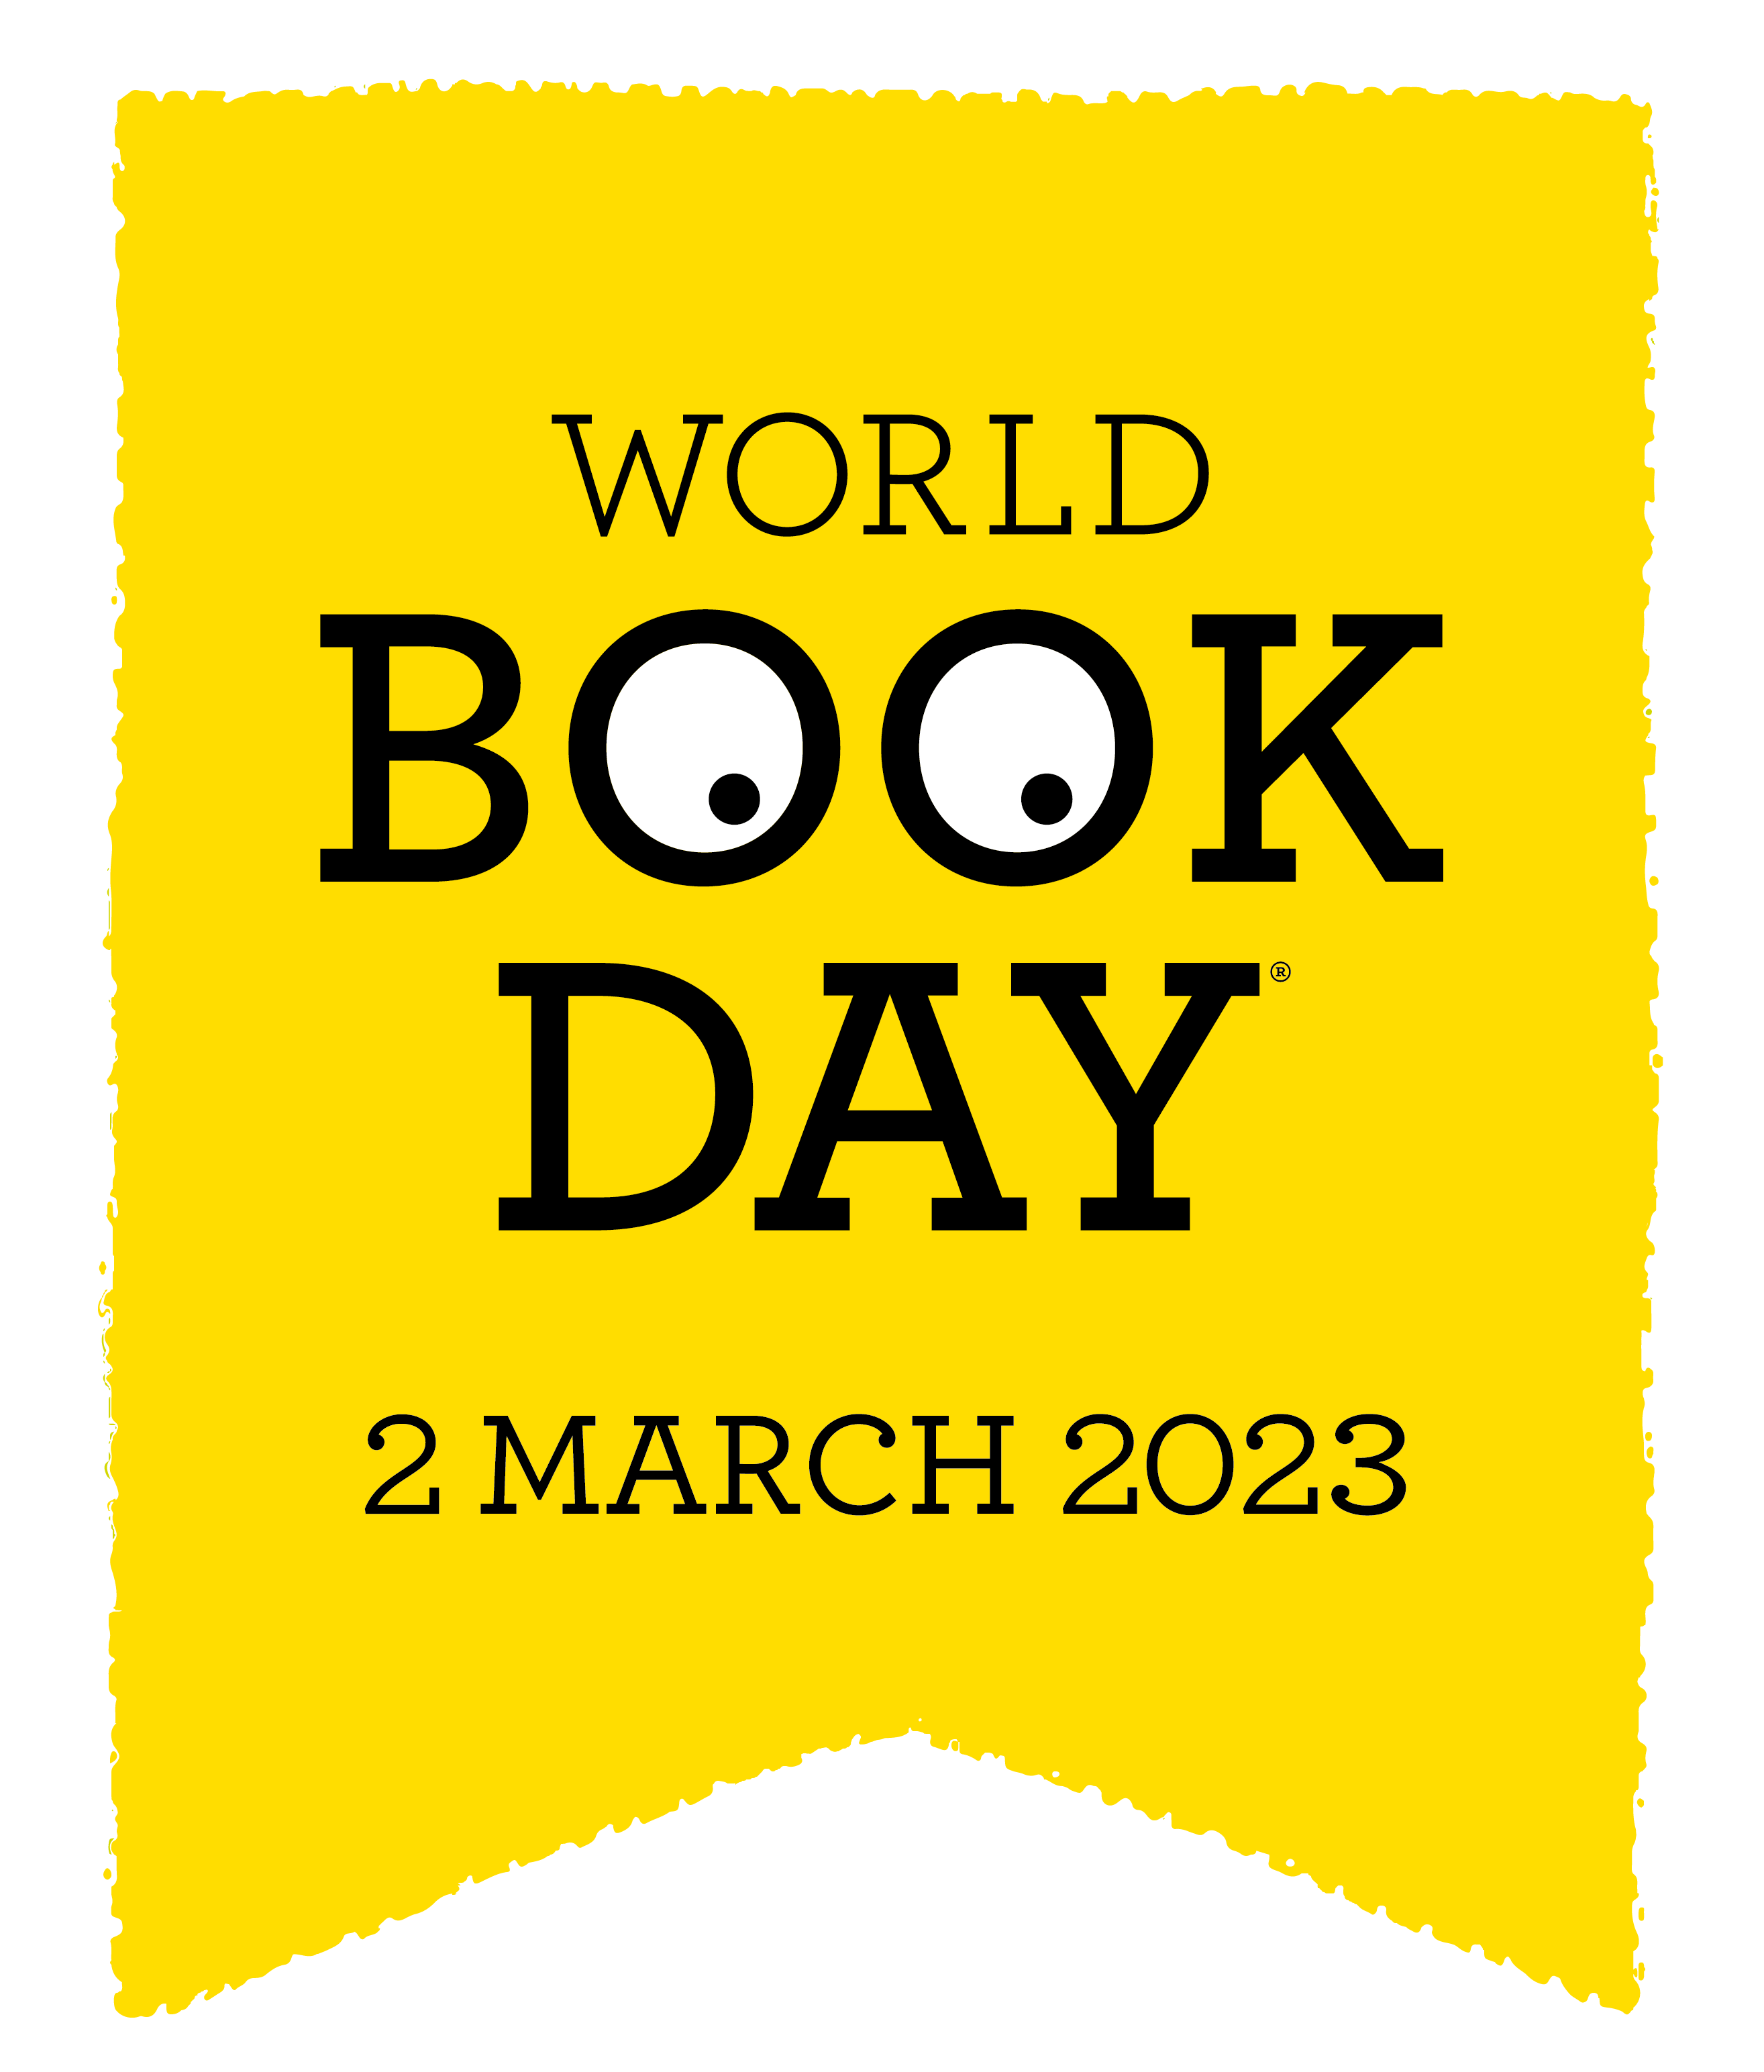 Save the date - World Book Day | World Book Day is a registered charity.  Our mission is to give every child and young person a book of their own.